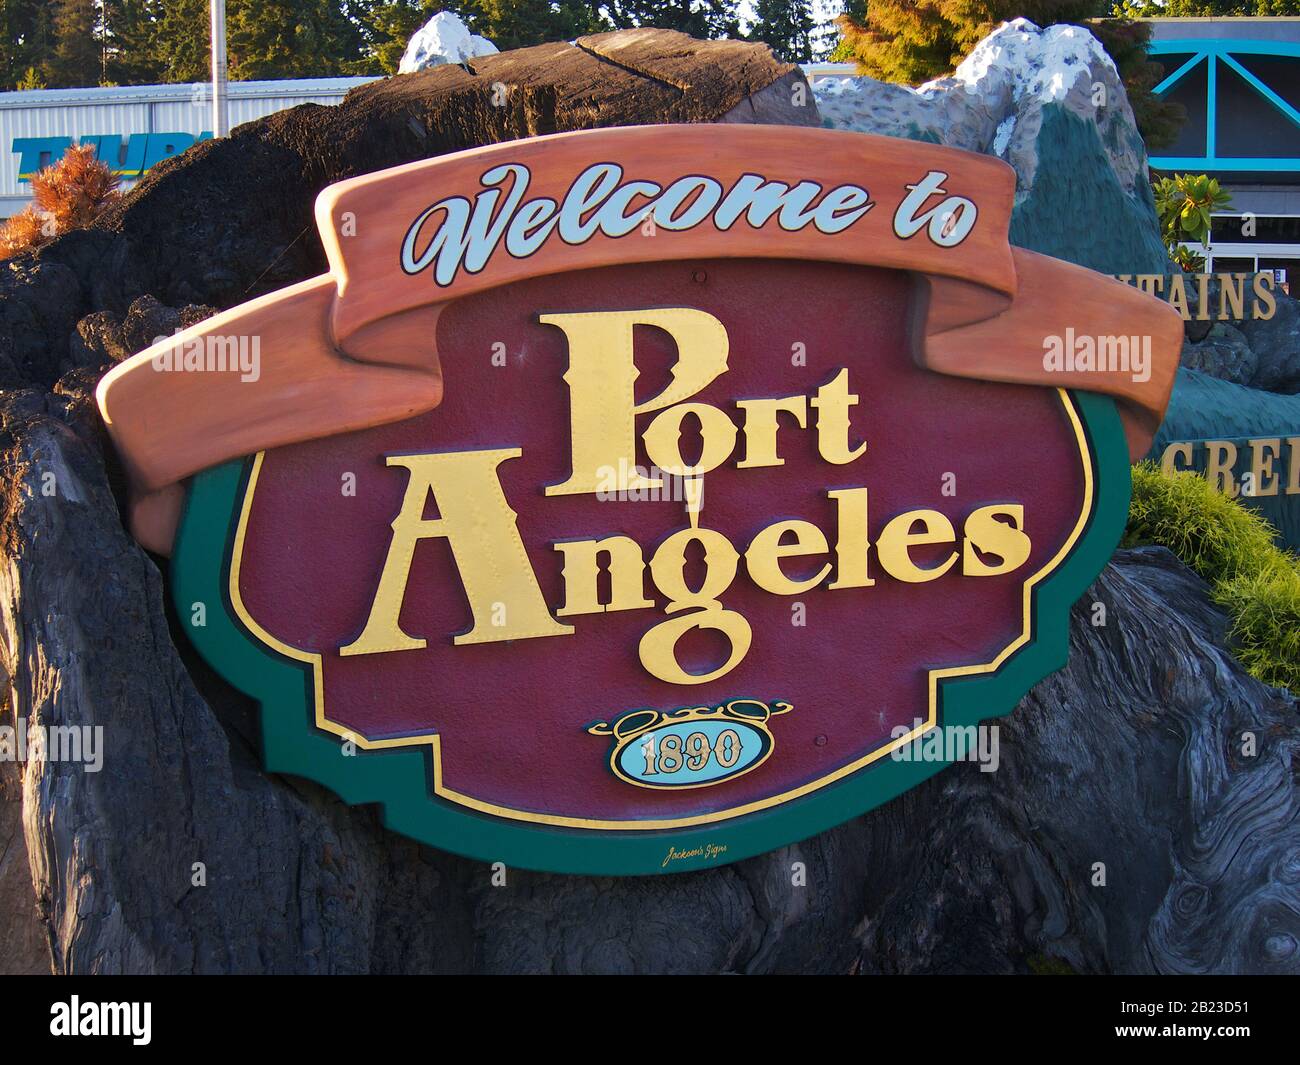 Port Angeles, Washington/USA - 08 19 2011: City sign. The city is famous for the Twilight book/movie series by Stephenie Meyer. Stock Photo